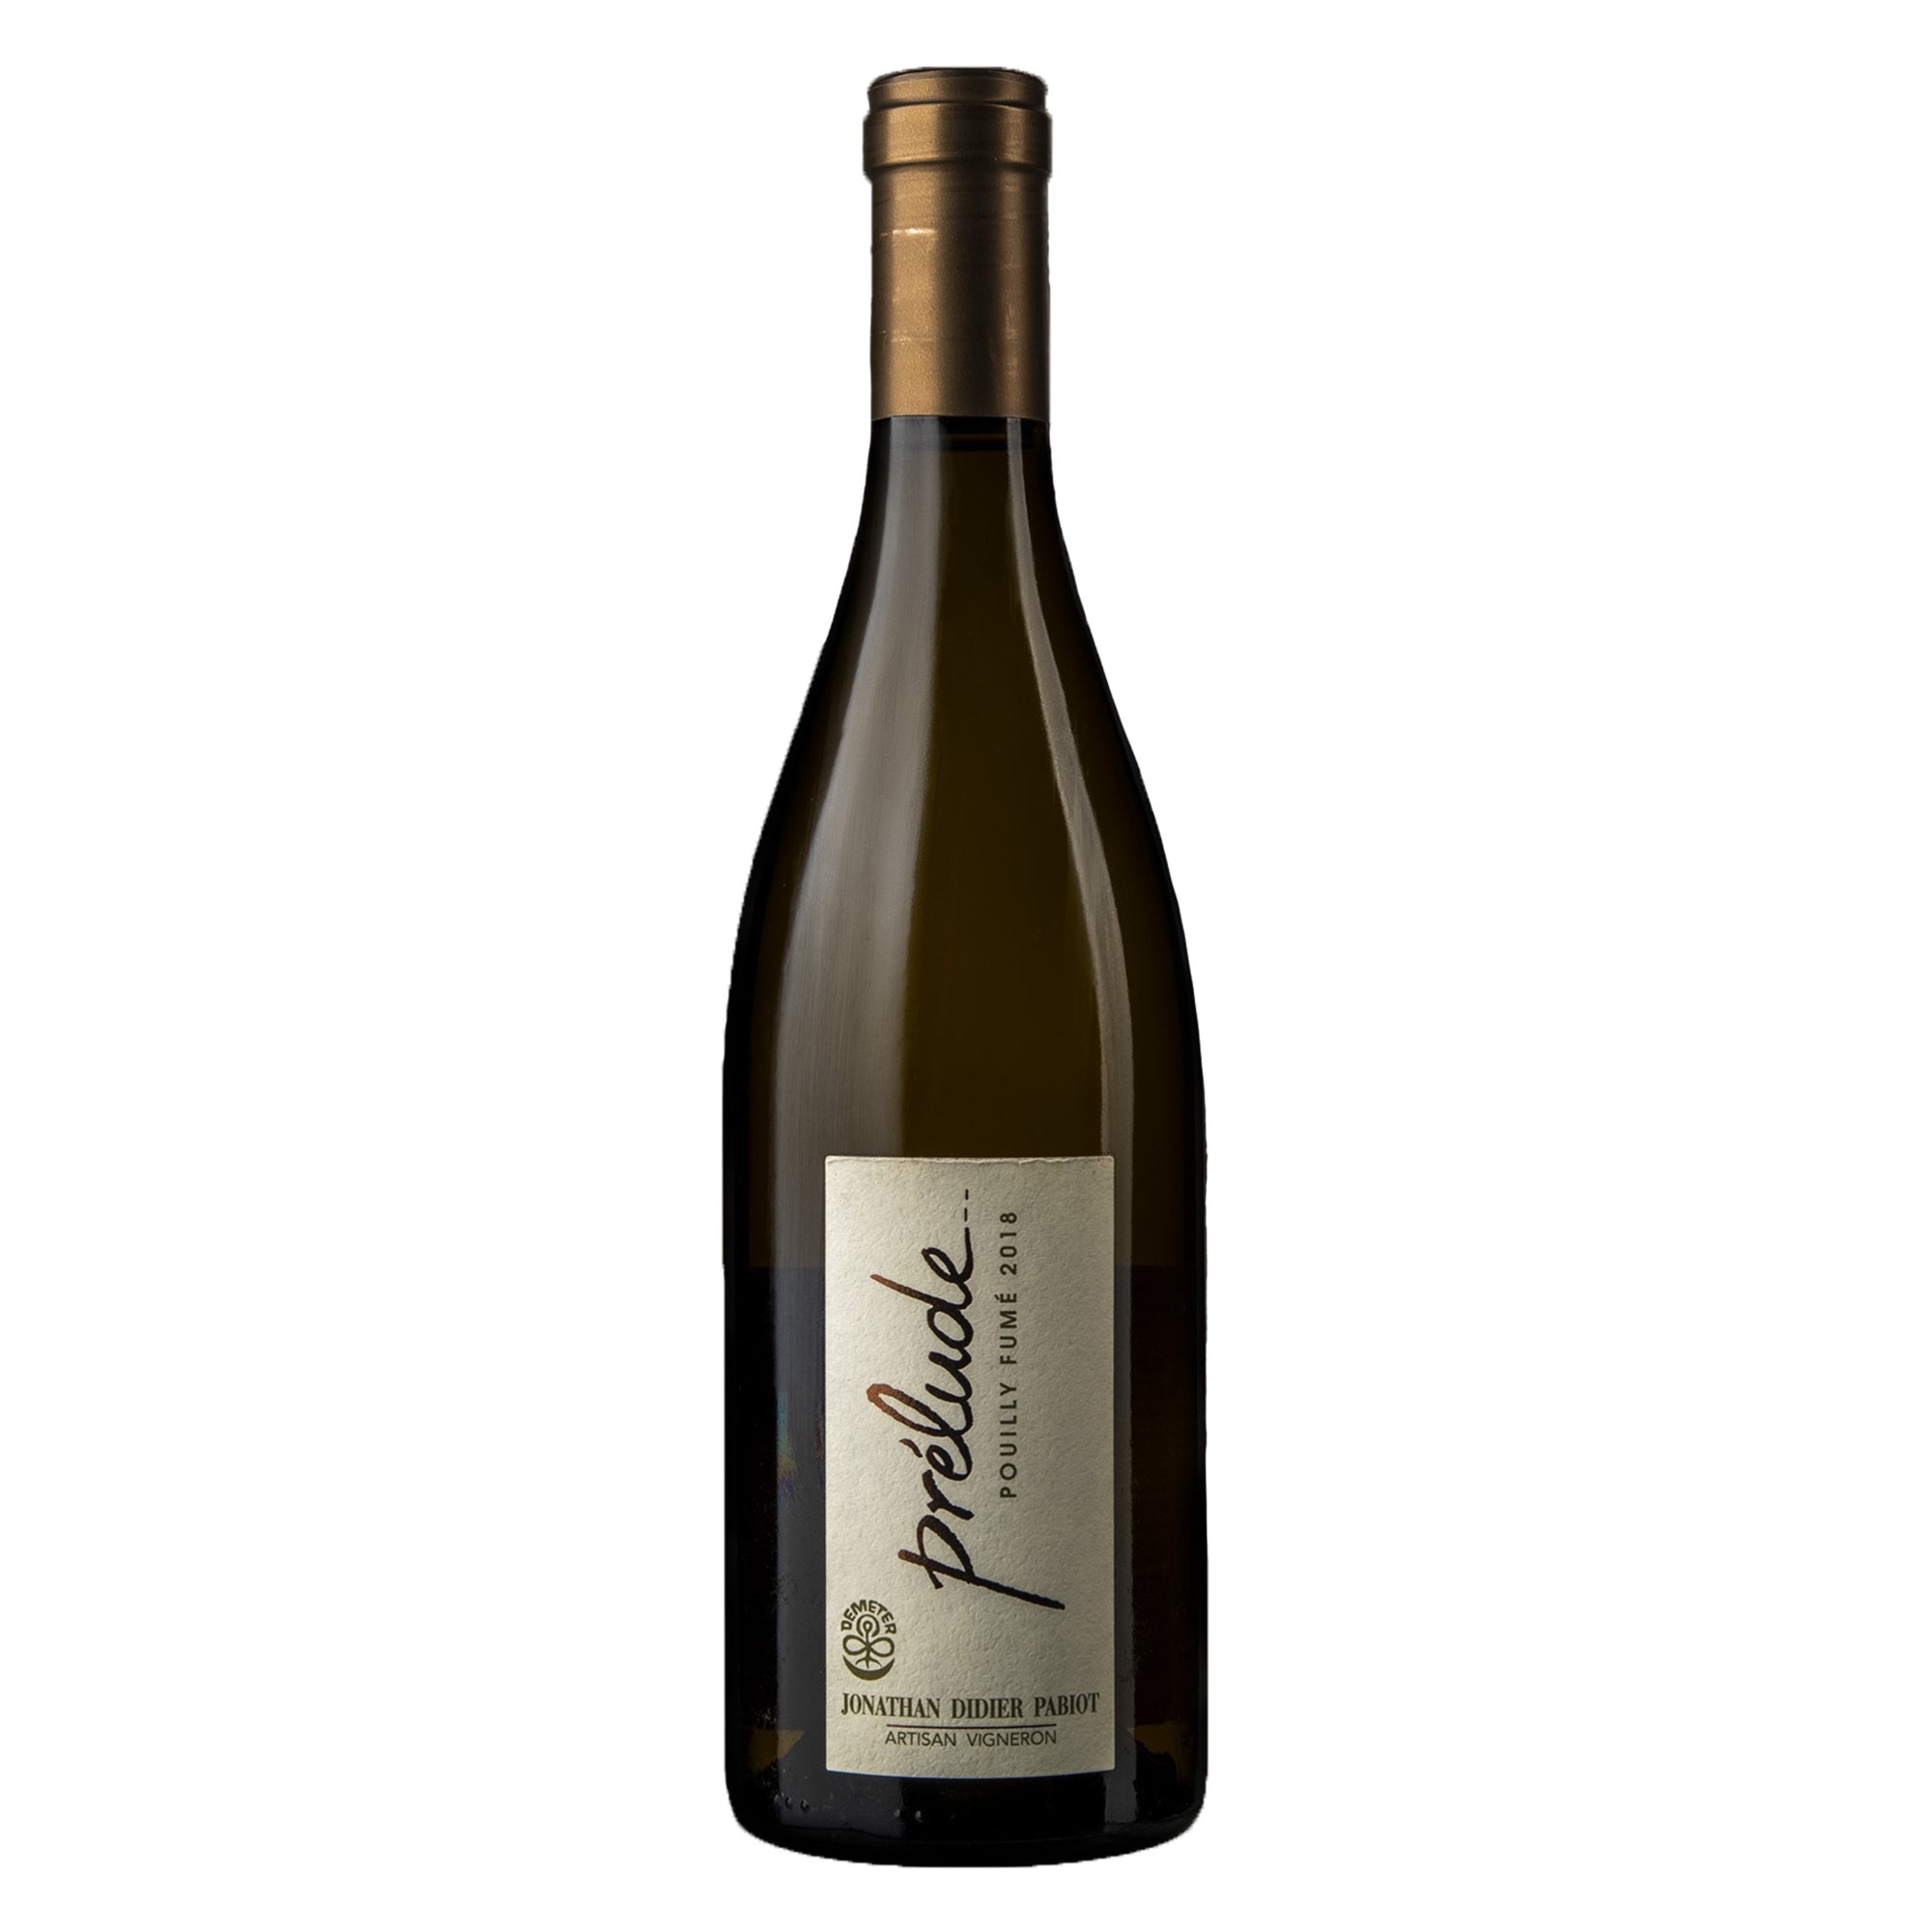 Domaine JONATHAN DIDIER PABIOT Pouilly-Fume "Prelude" 2020